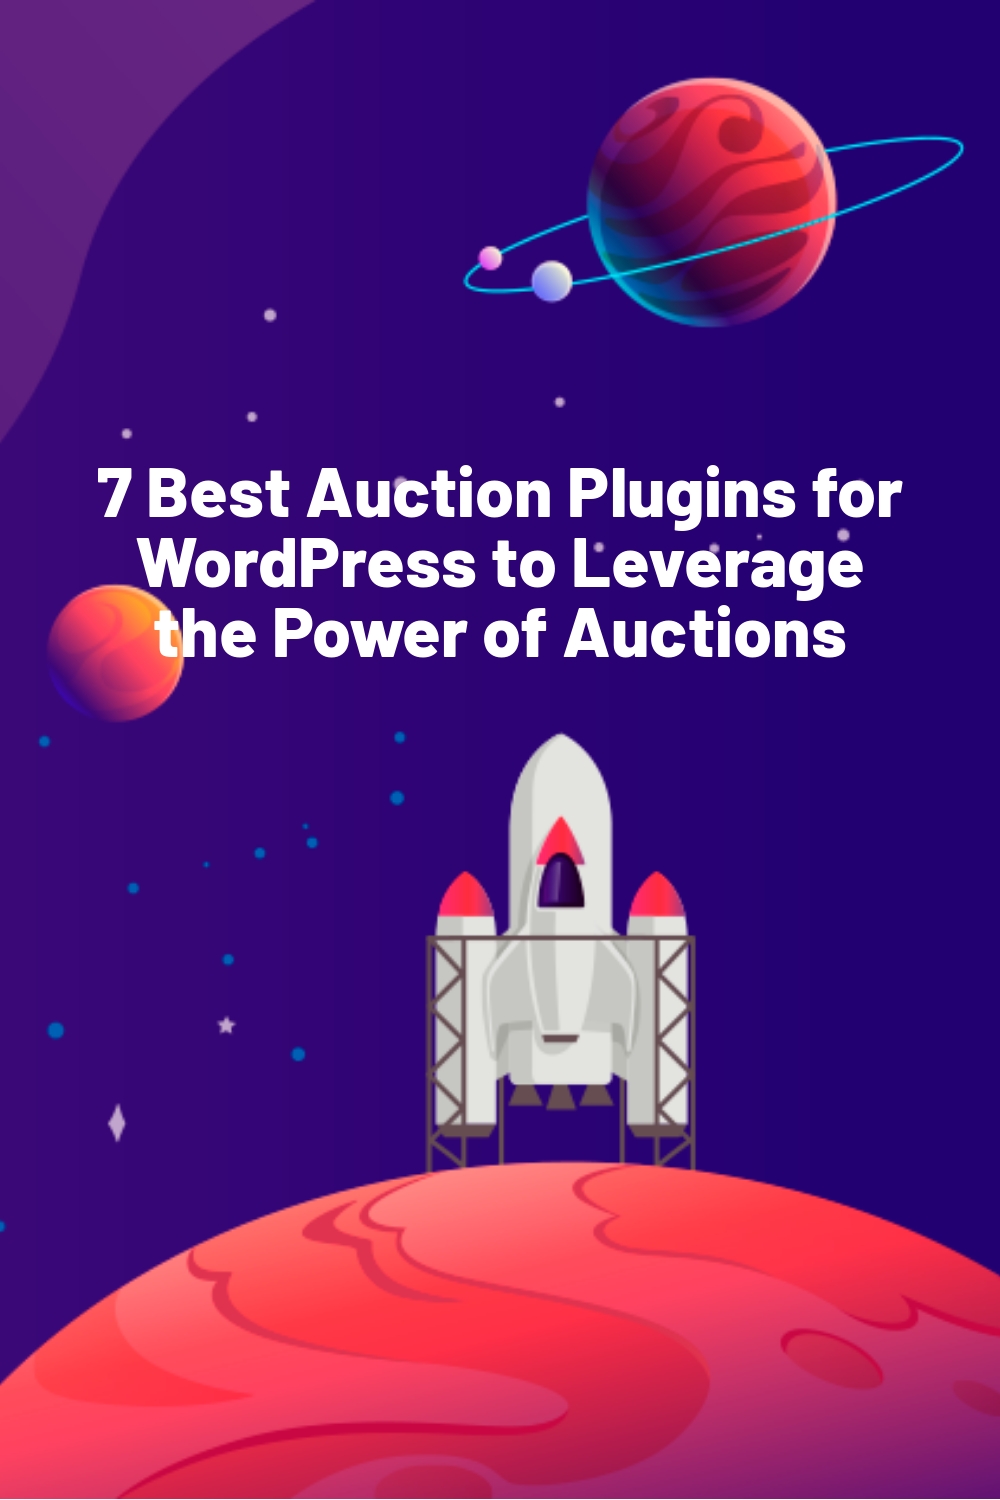 7 Best Auction Plugins for WordPress to Leverage the Power of Auctions